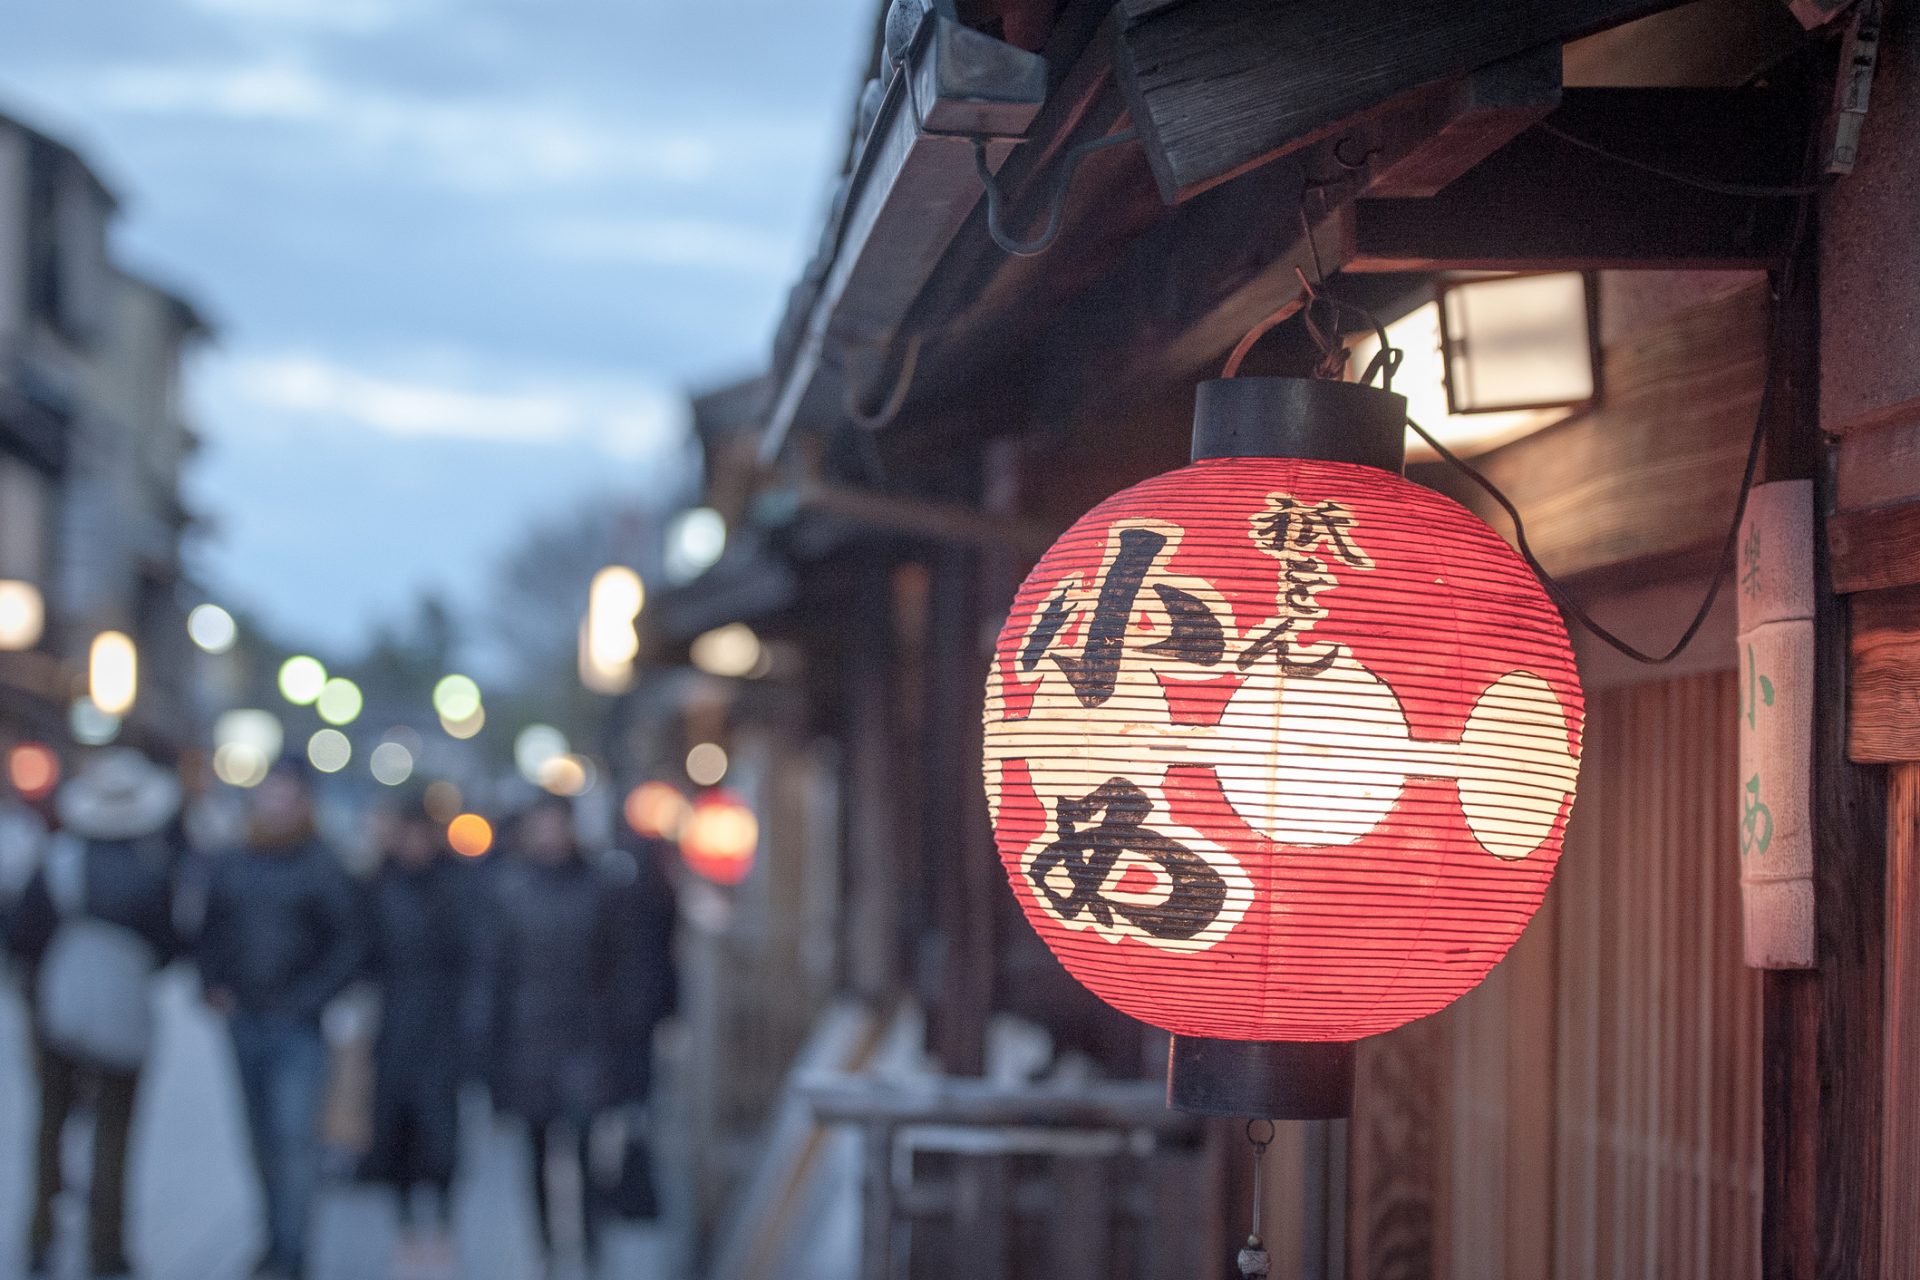 <p>Kyoto has also placed restrictions to avoid issues caused by overtourism. The city has blocked tourists from accessing some small private allies in its Geisha District.</p>